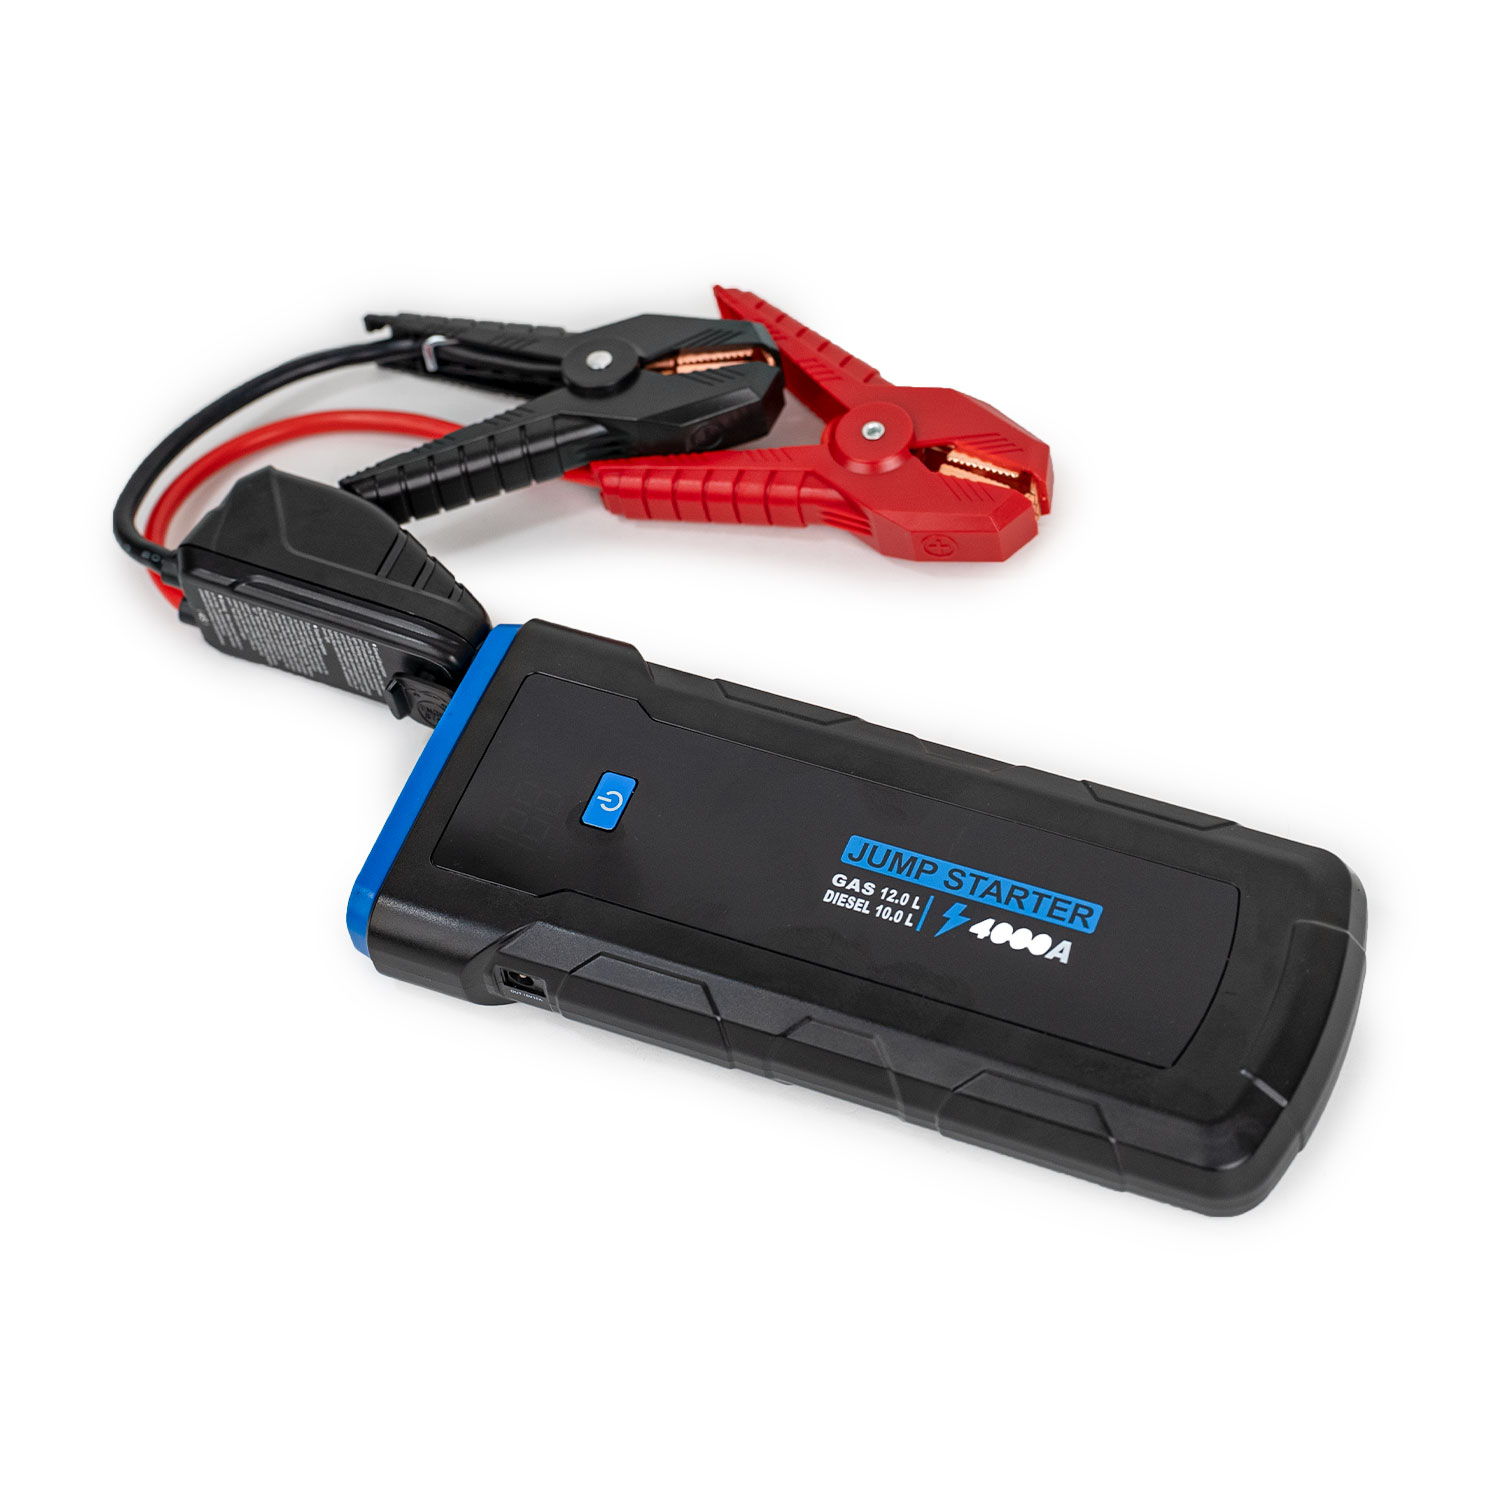 The Best Car Jumper Power Bank In Malaysia To Jumpstart Your Car